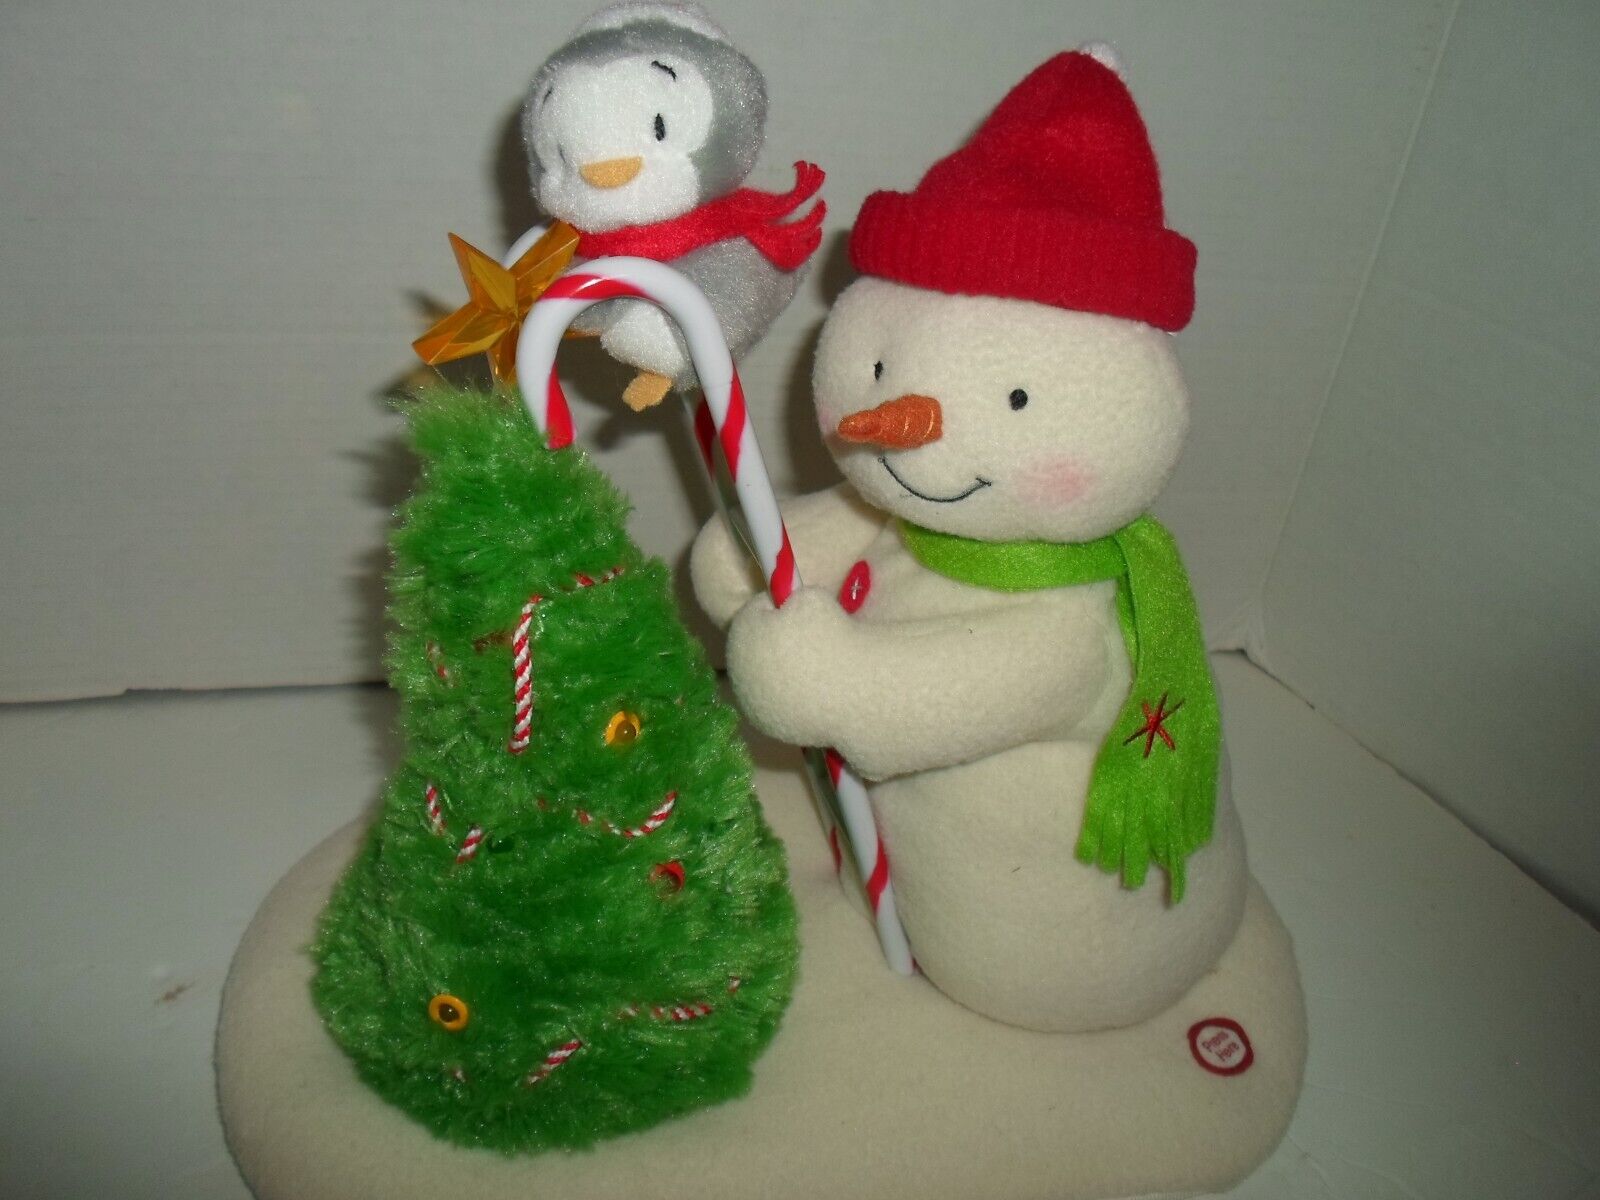 2010 HALLMARK JINGLE PALS SNOWMAN TRIMMING THE TREE MUSICAL,ANIMATED AND LIGHTS